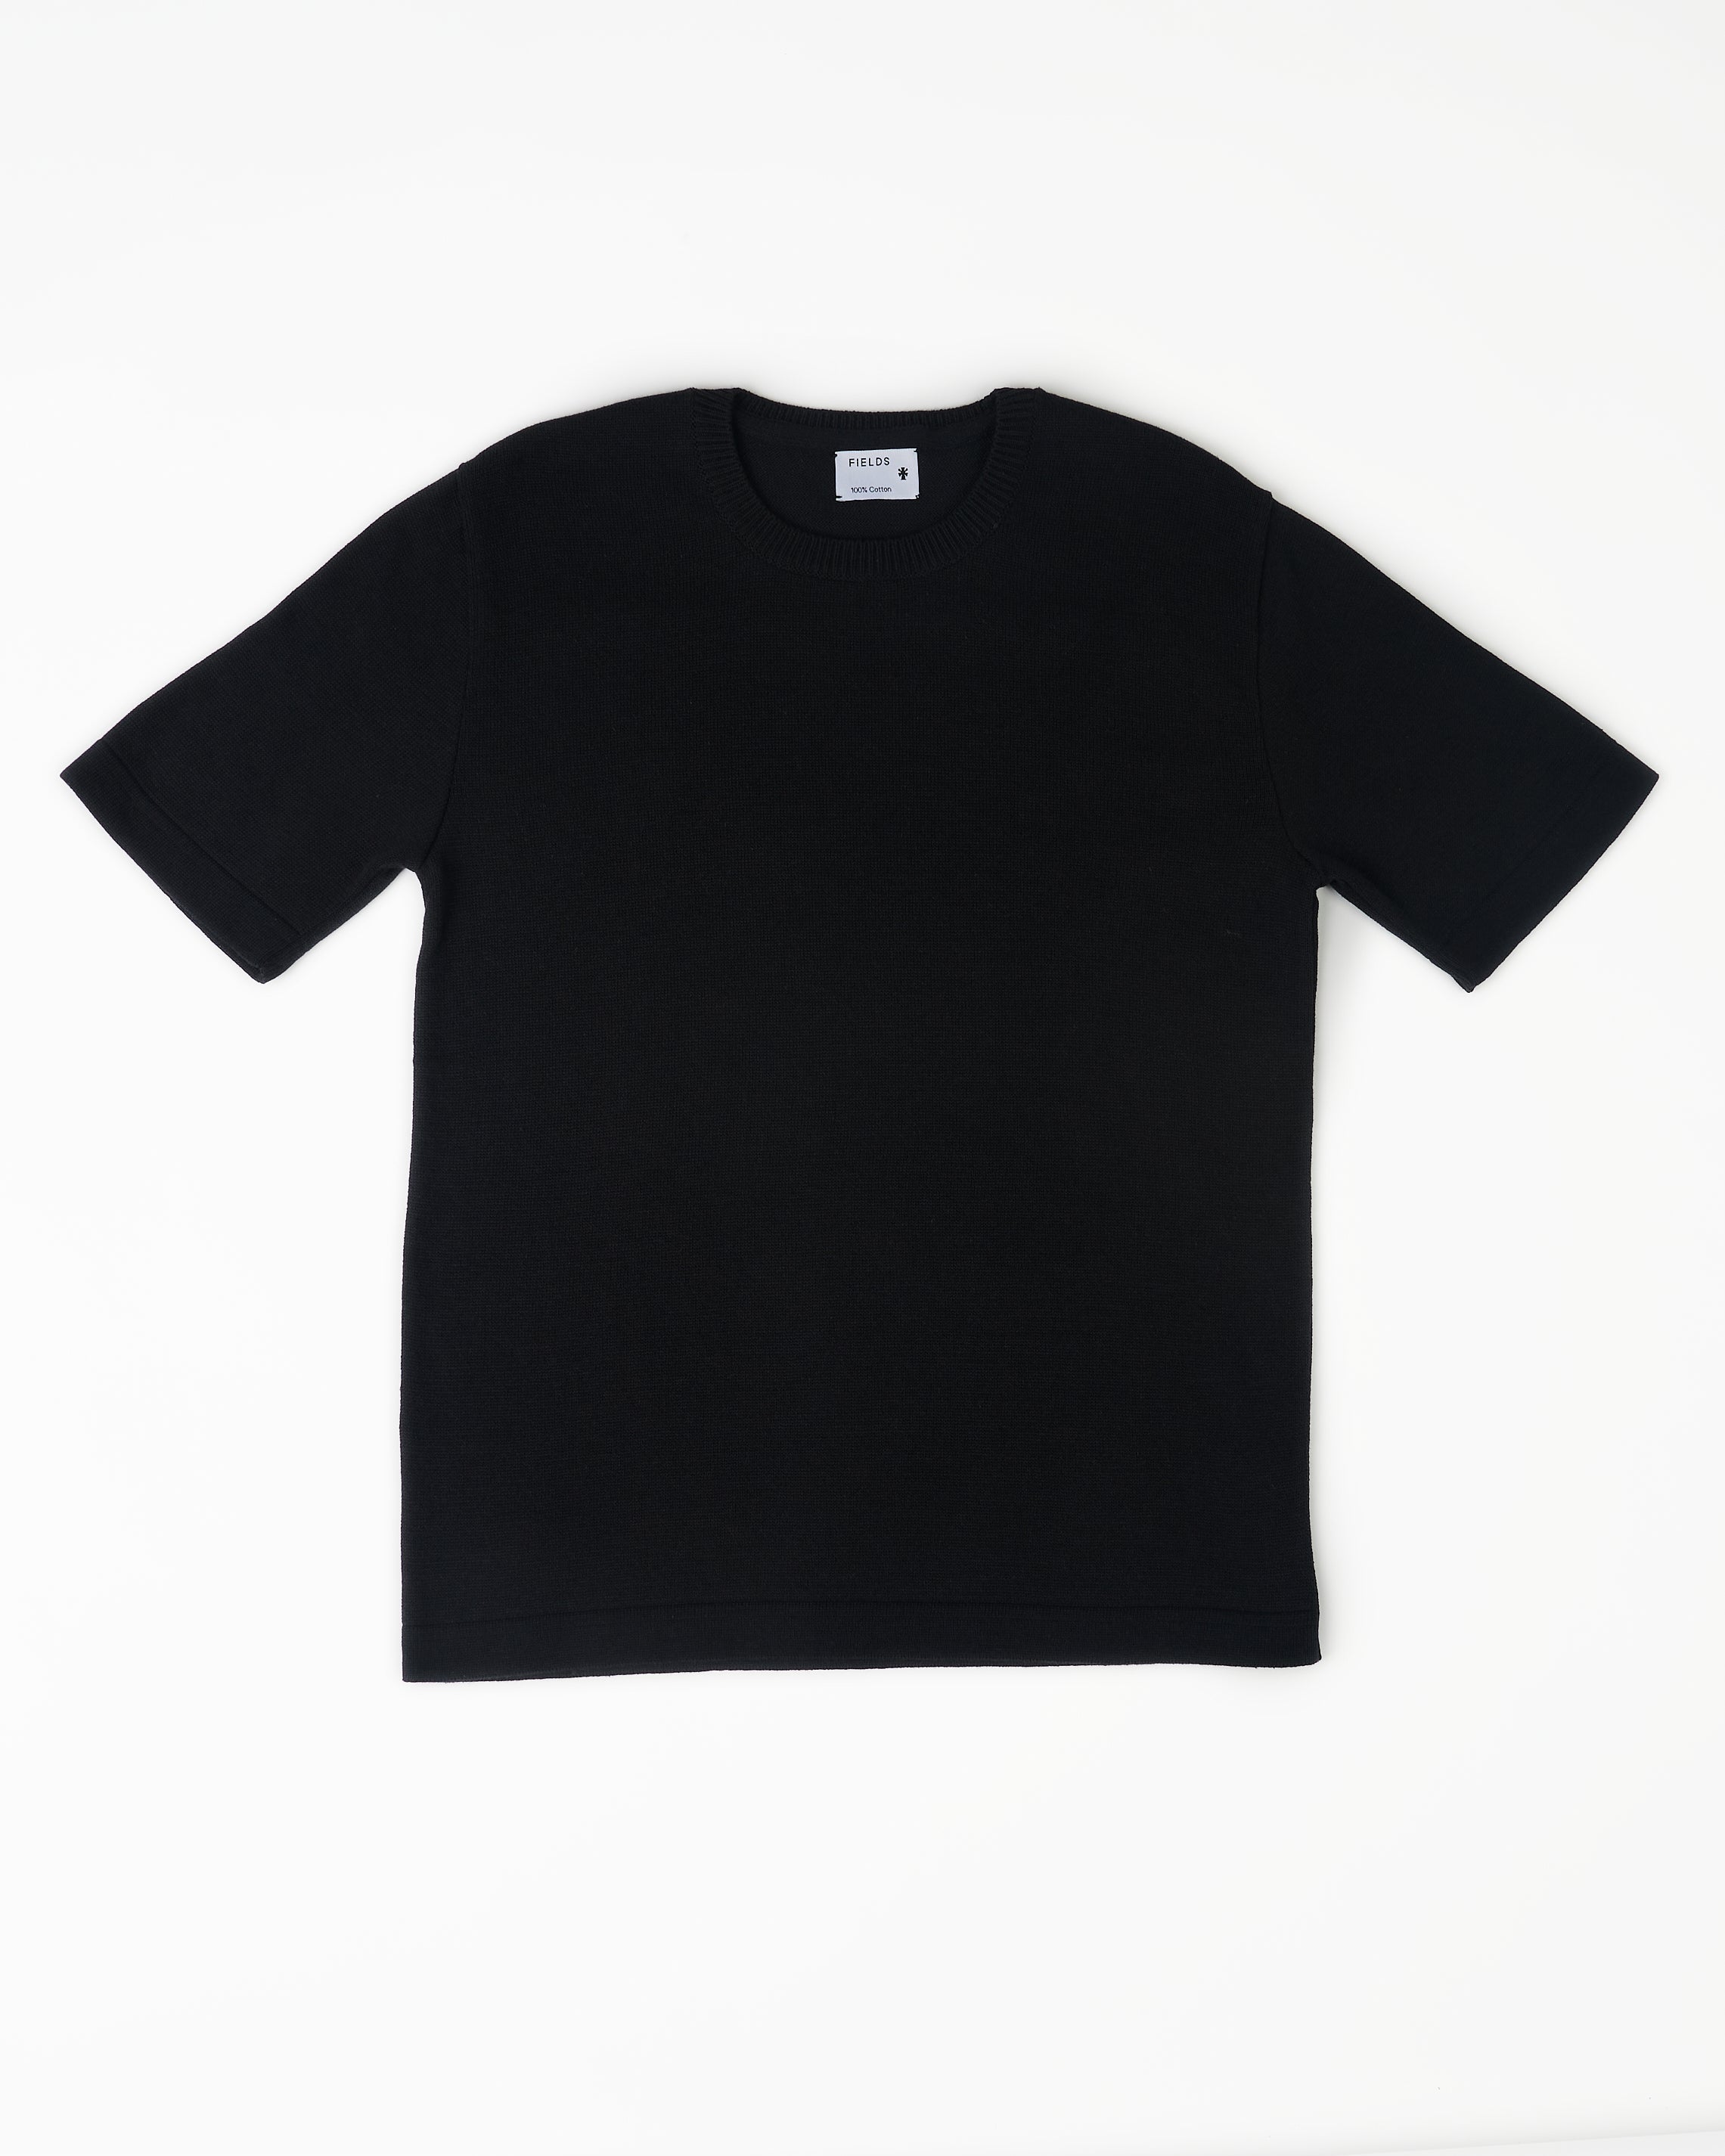 Knitted Tee in Black Beauty